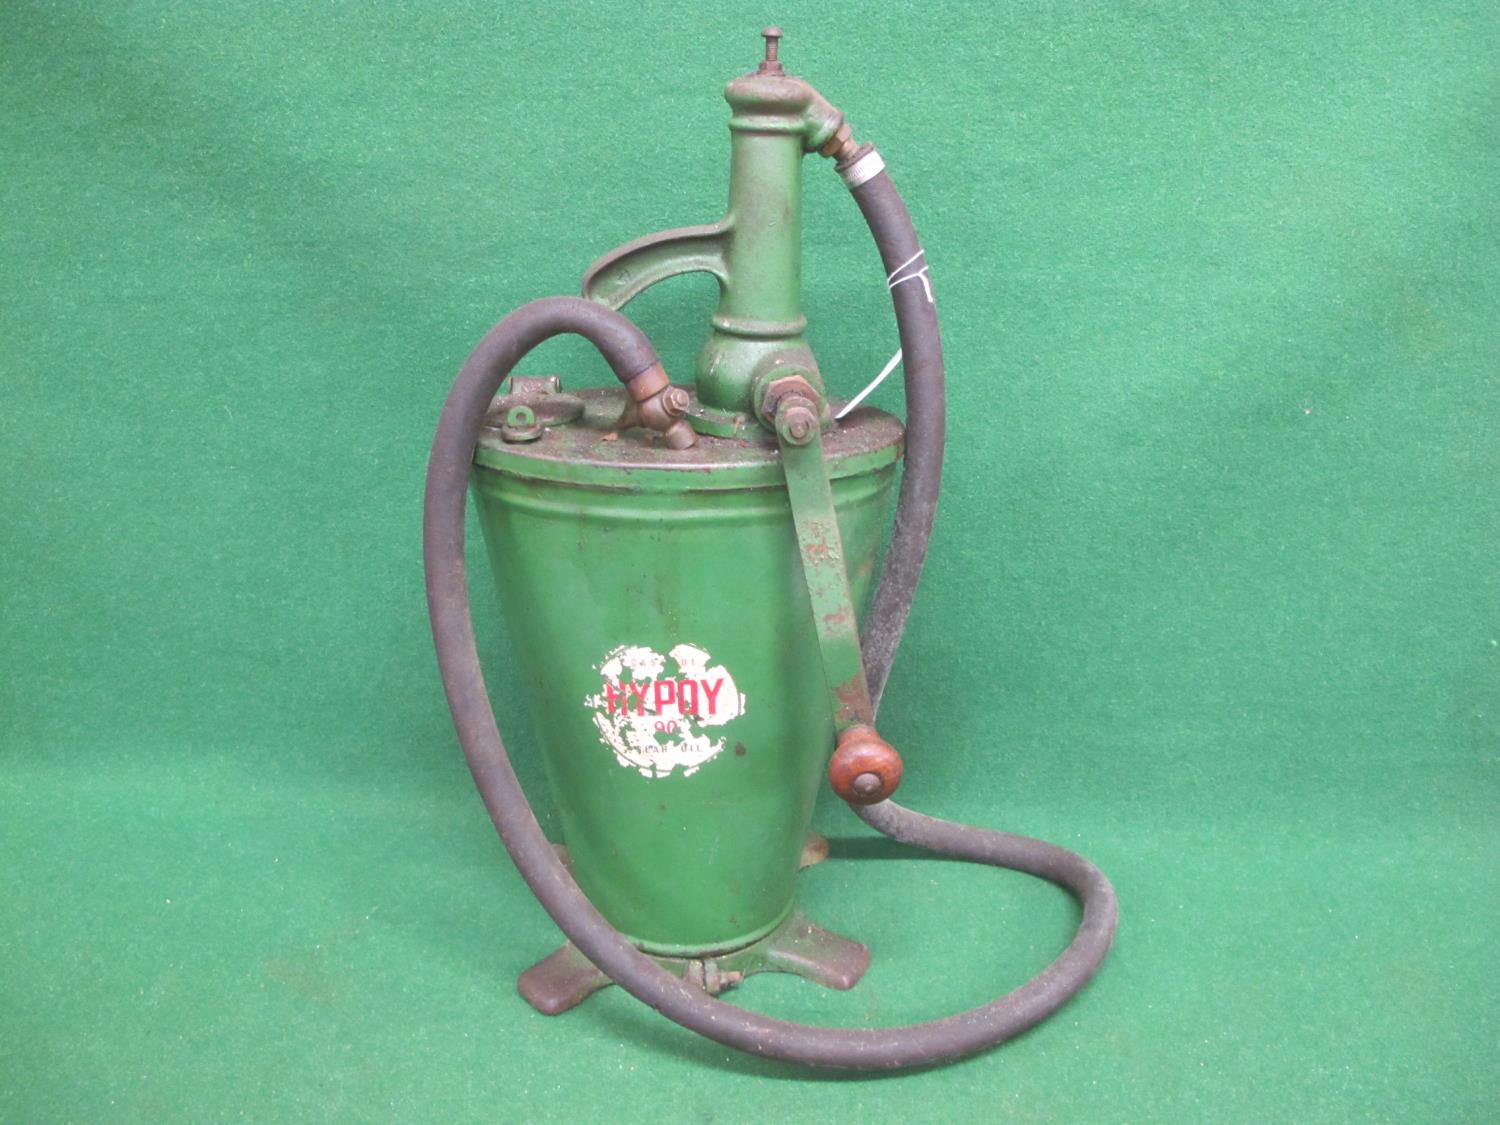 Portable garage gear oil pump with hose and tap, having Castrol Hypoy 90 Gear Oil logos - 26" - Image 3 of 3